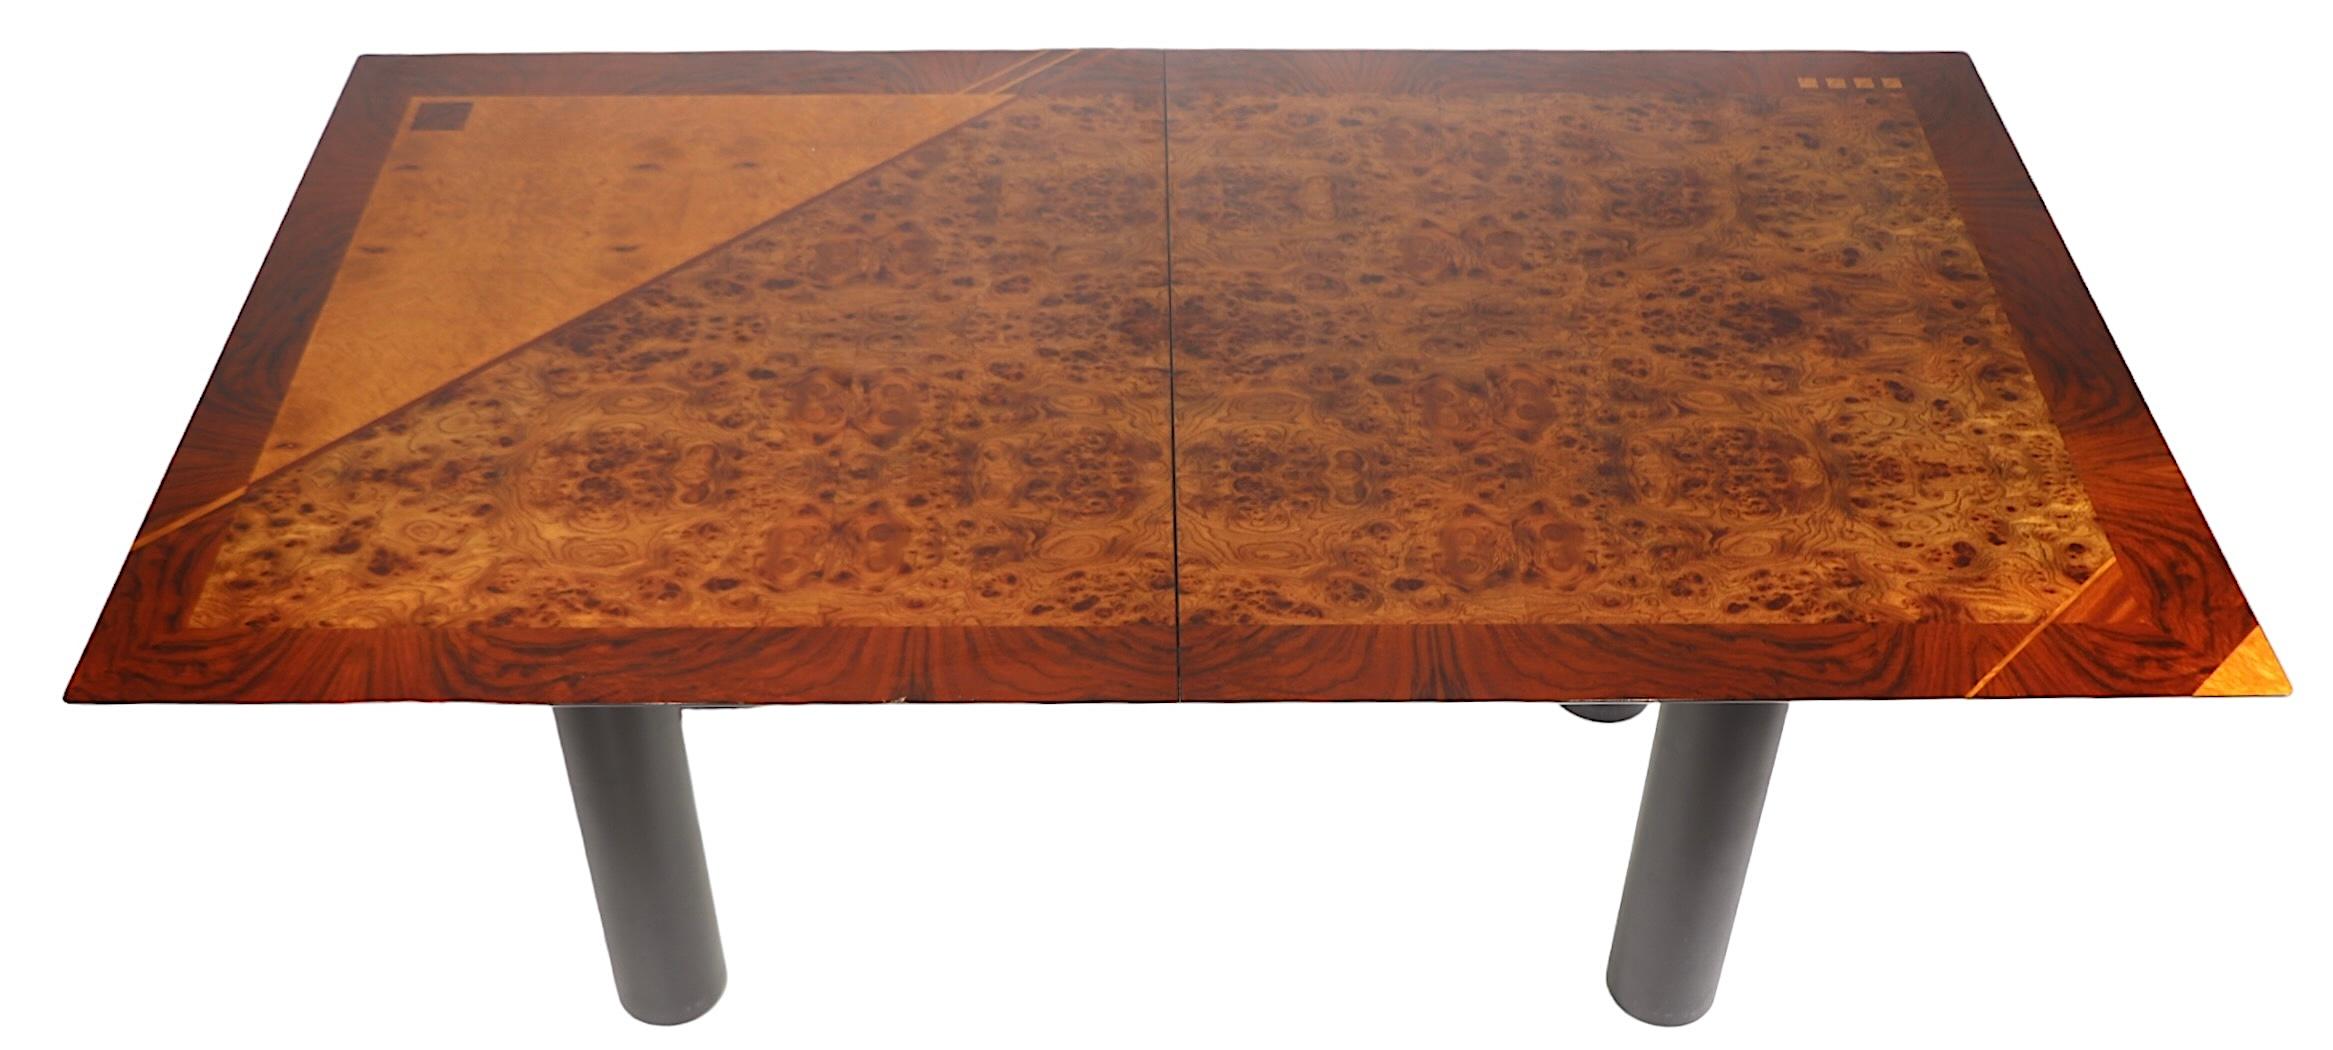 Italian Post Modern Dining Table by Oscar Dell Arredamento for Miniforms c 1970s For Sale 4